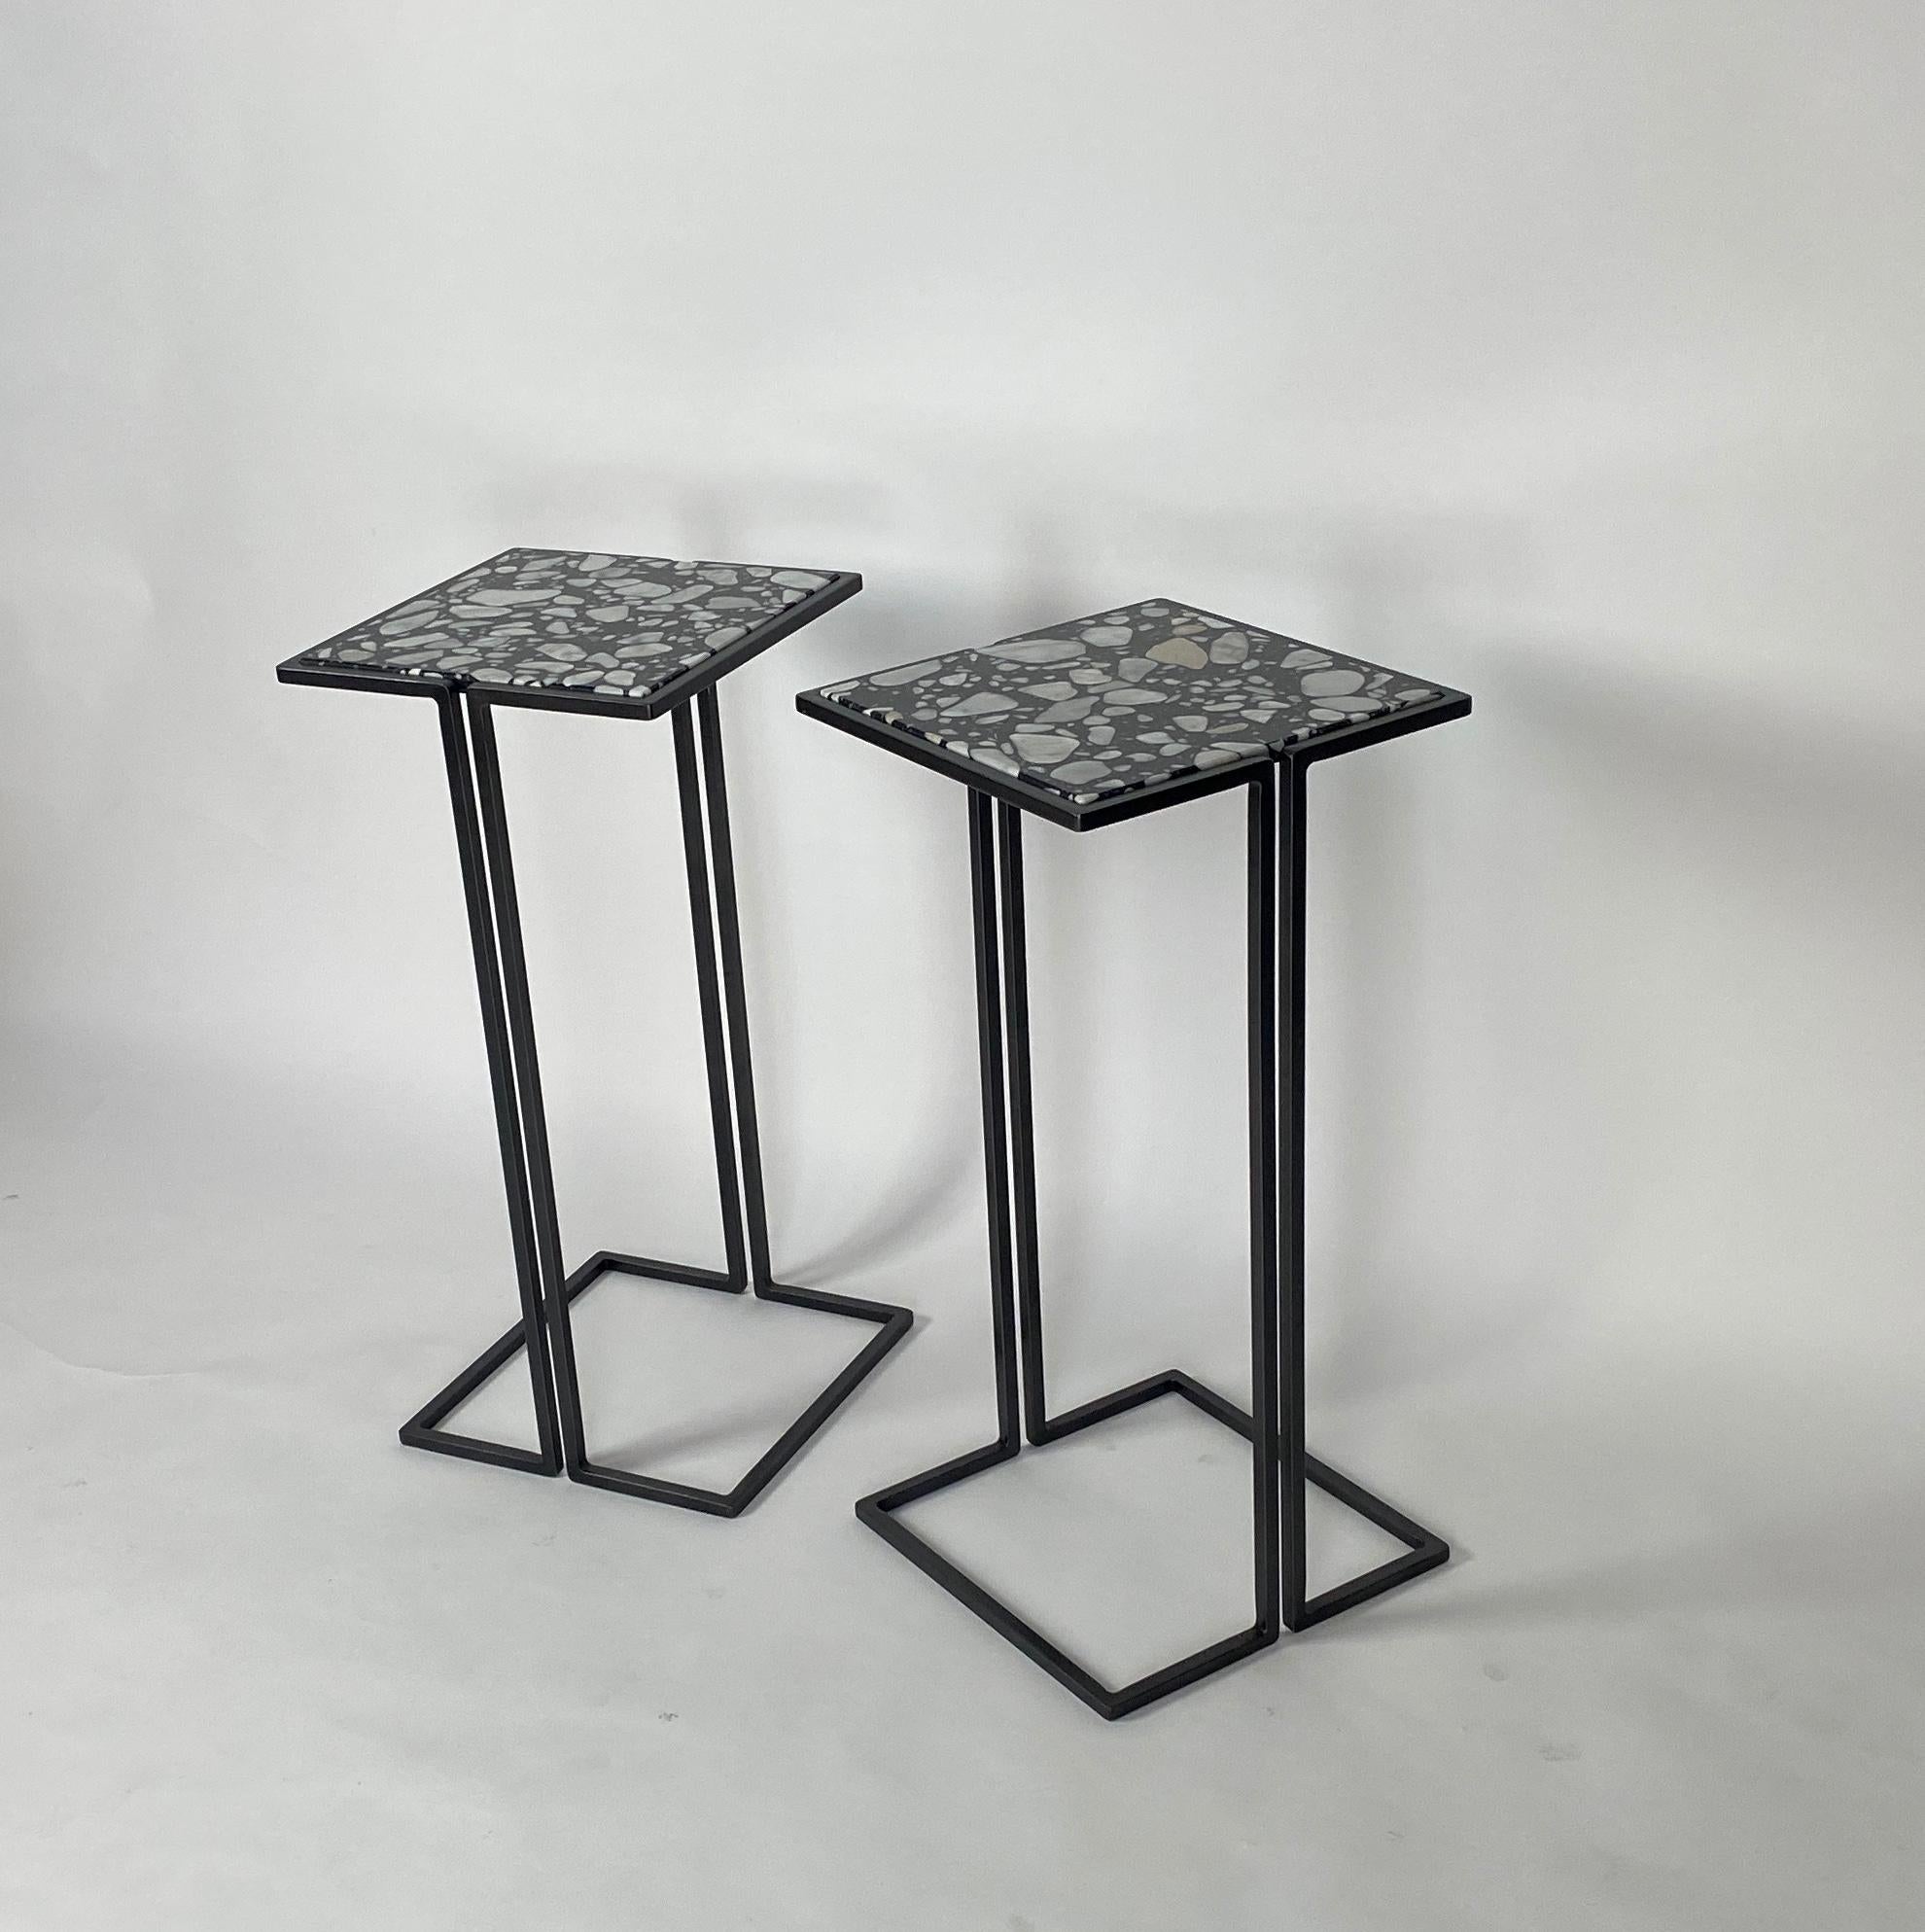 Two small-scale side tables.
Minimalist design with gun metal patina frames and Palladrio Moro marble tops.
Versatile tables, perfect for cocktails, laptops. These side tables nestle nicely around the arms of chairs to provide a nice sized